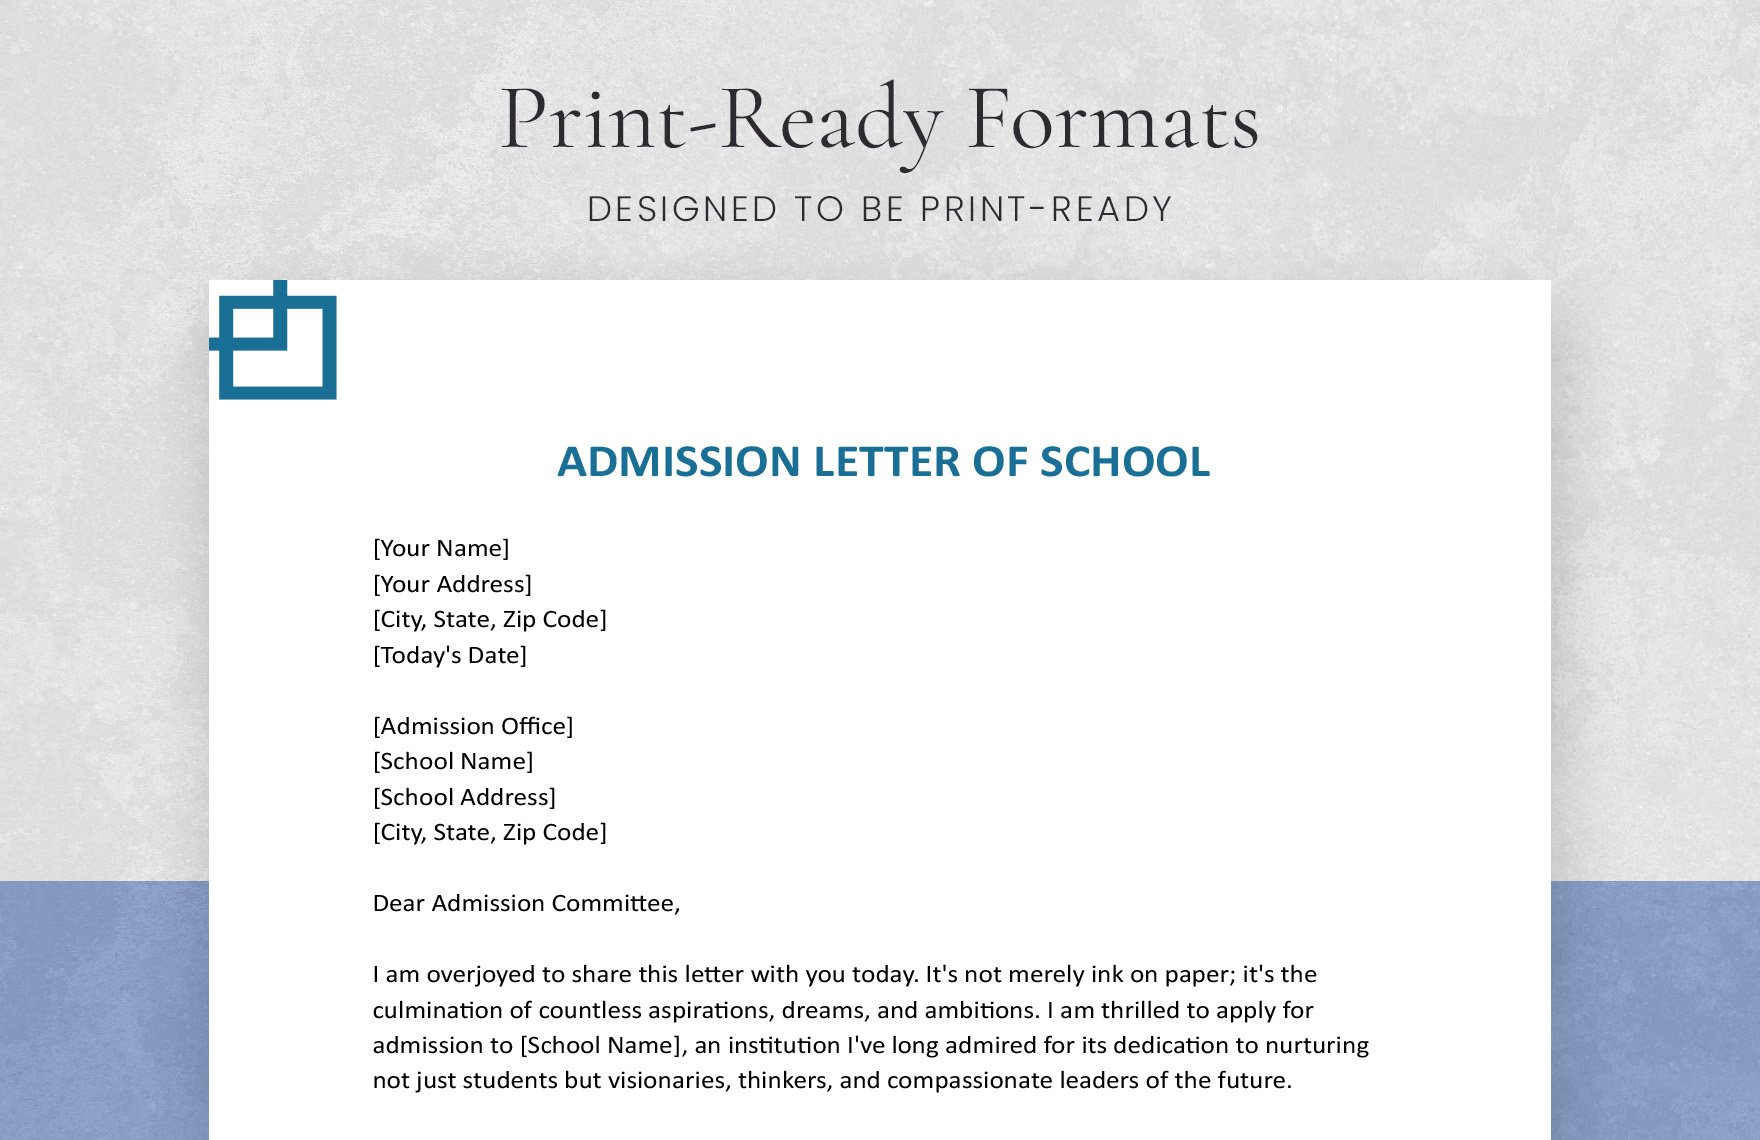 Admission Letter Of School